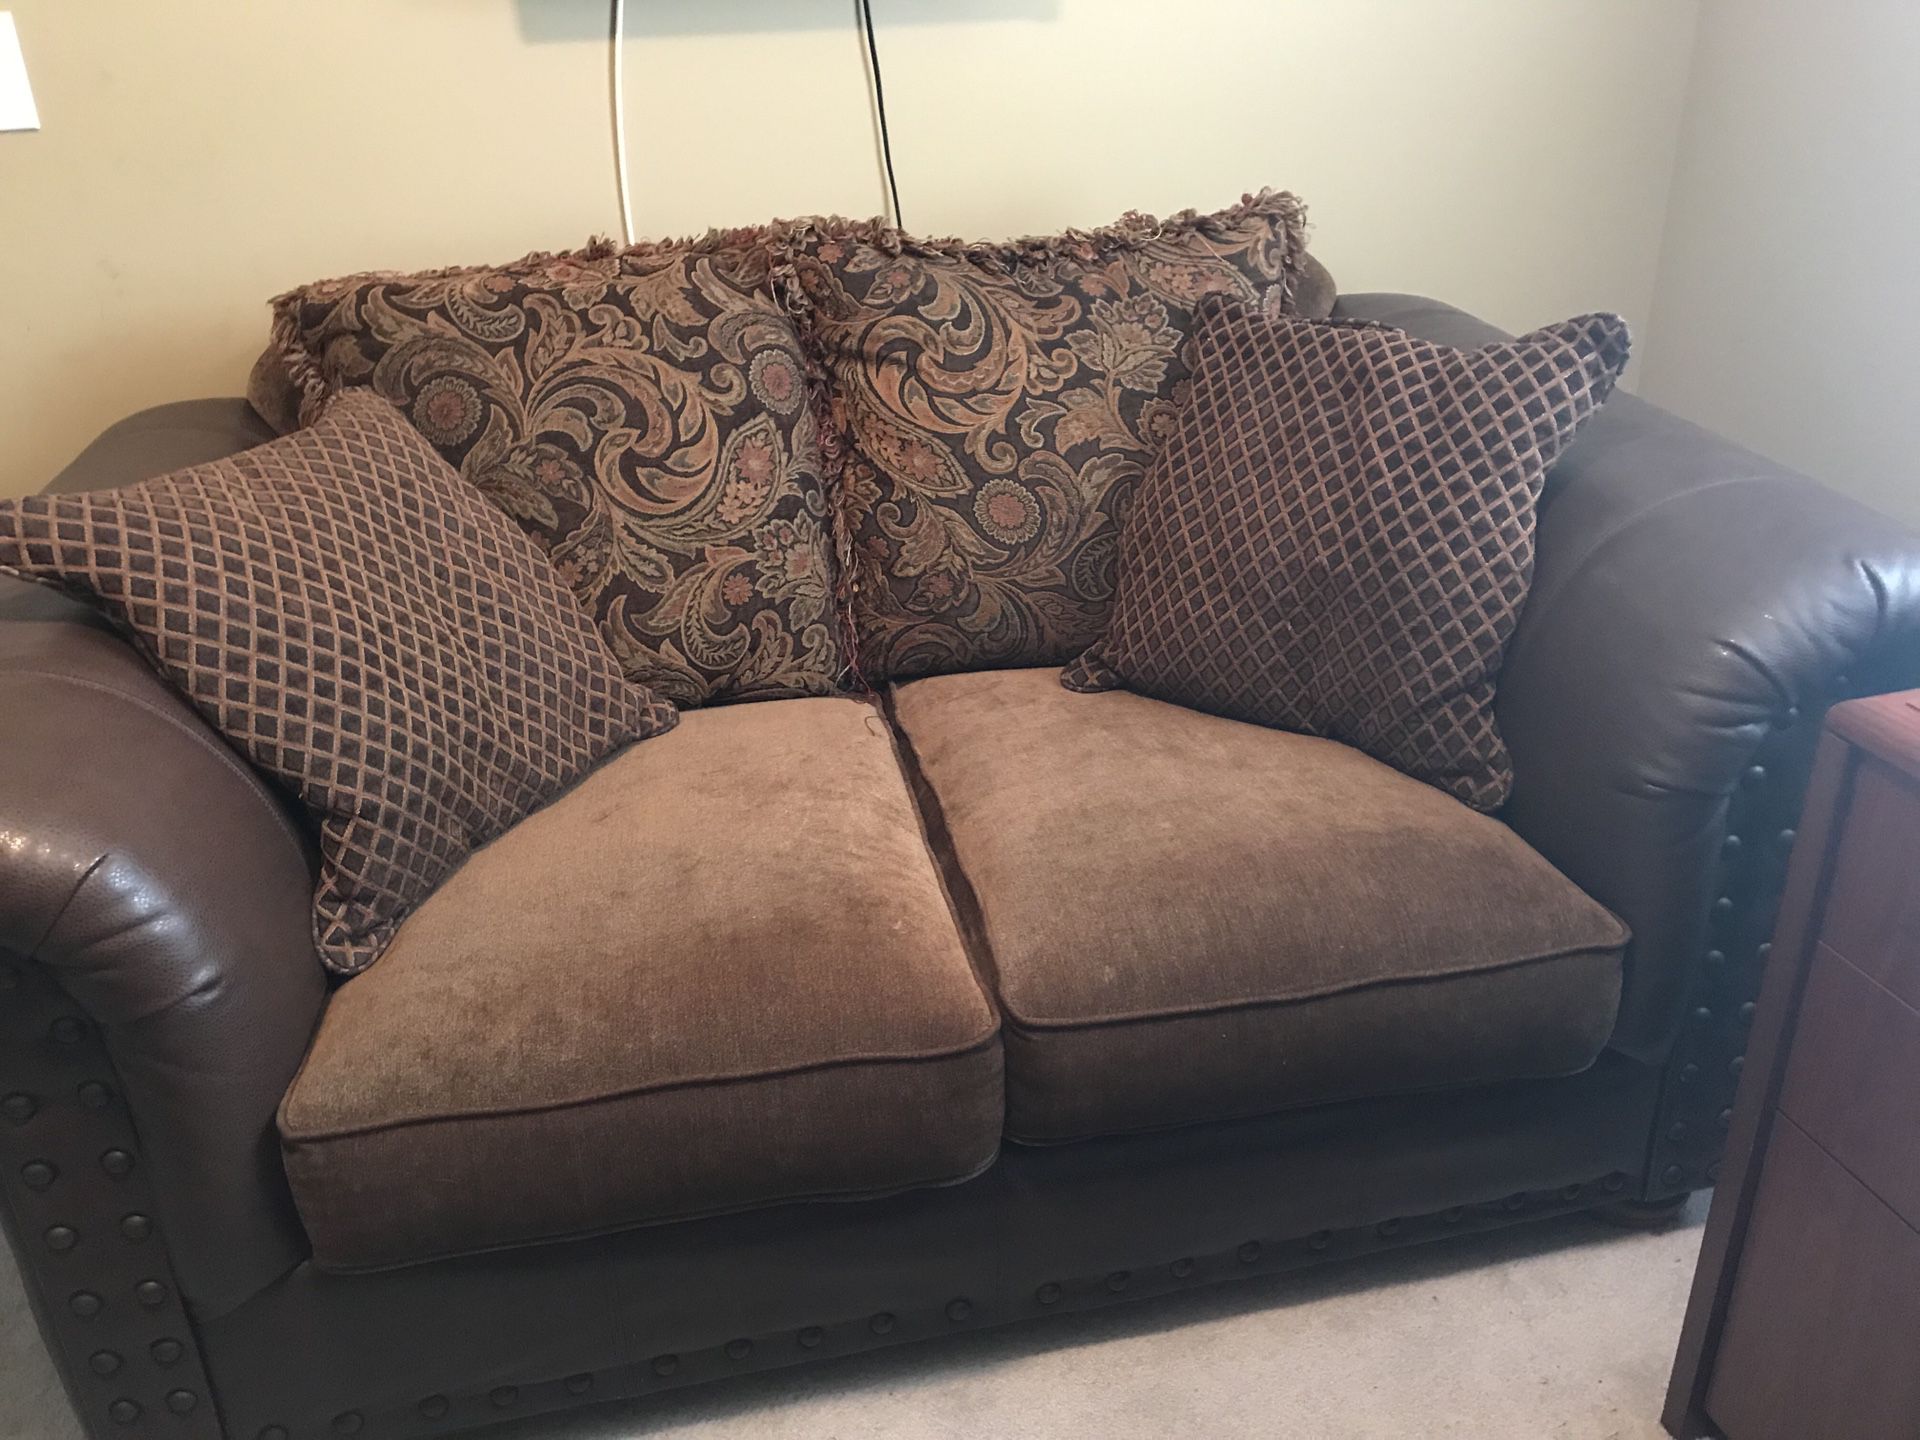 Couch and love seat